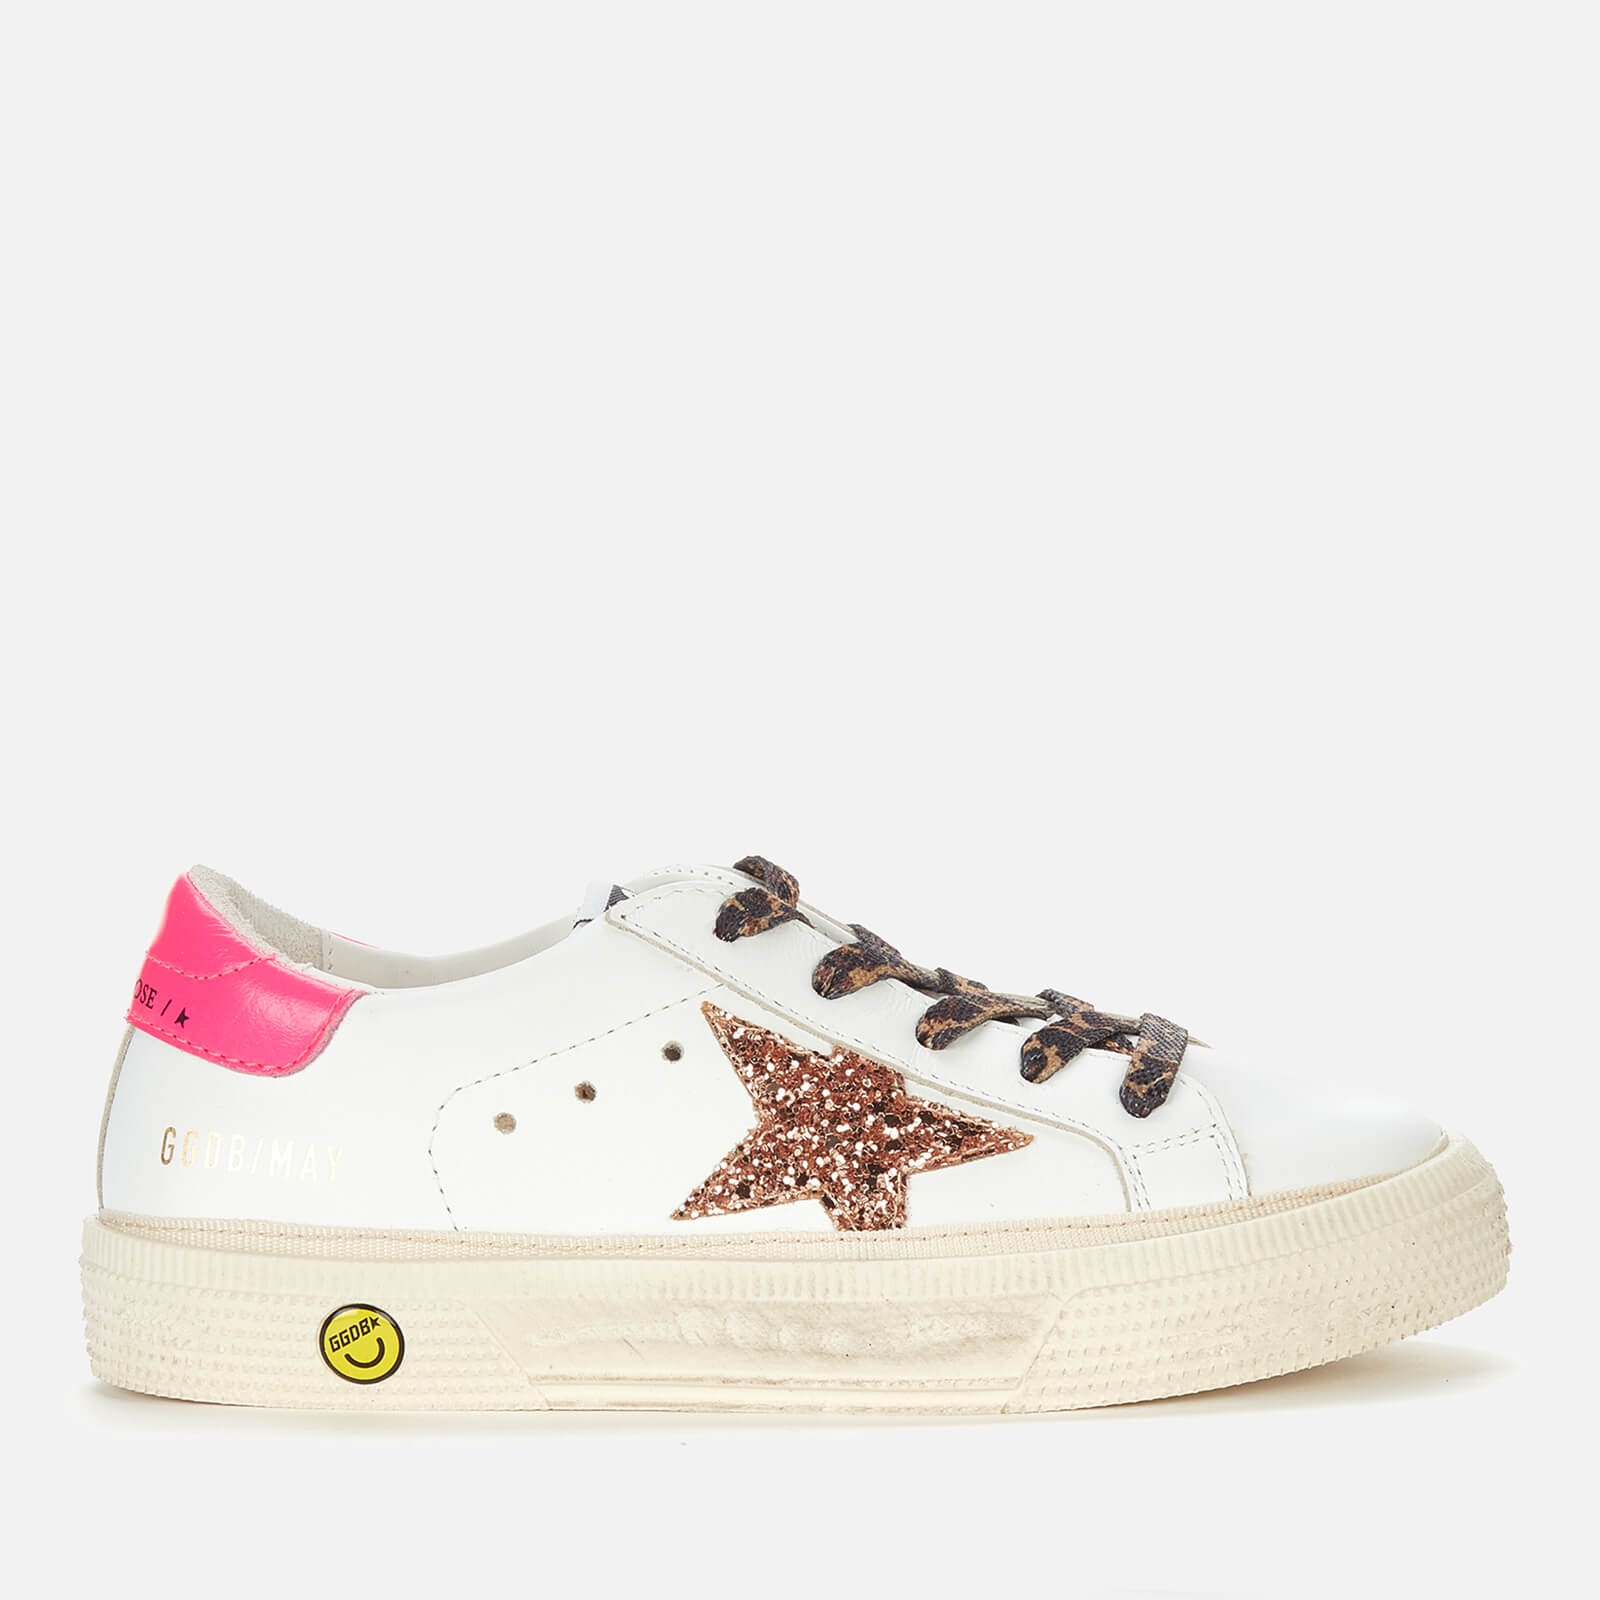 Golden Goose Kids' May Leather Glitter Trainers - White/Peach/Pink Fluo - UK 10 Kids